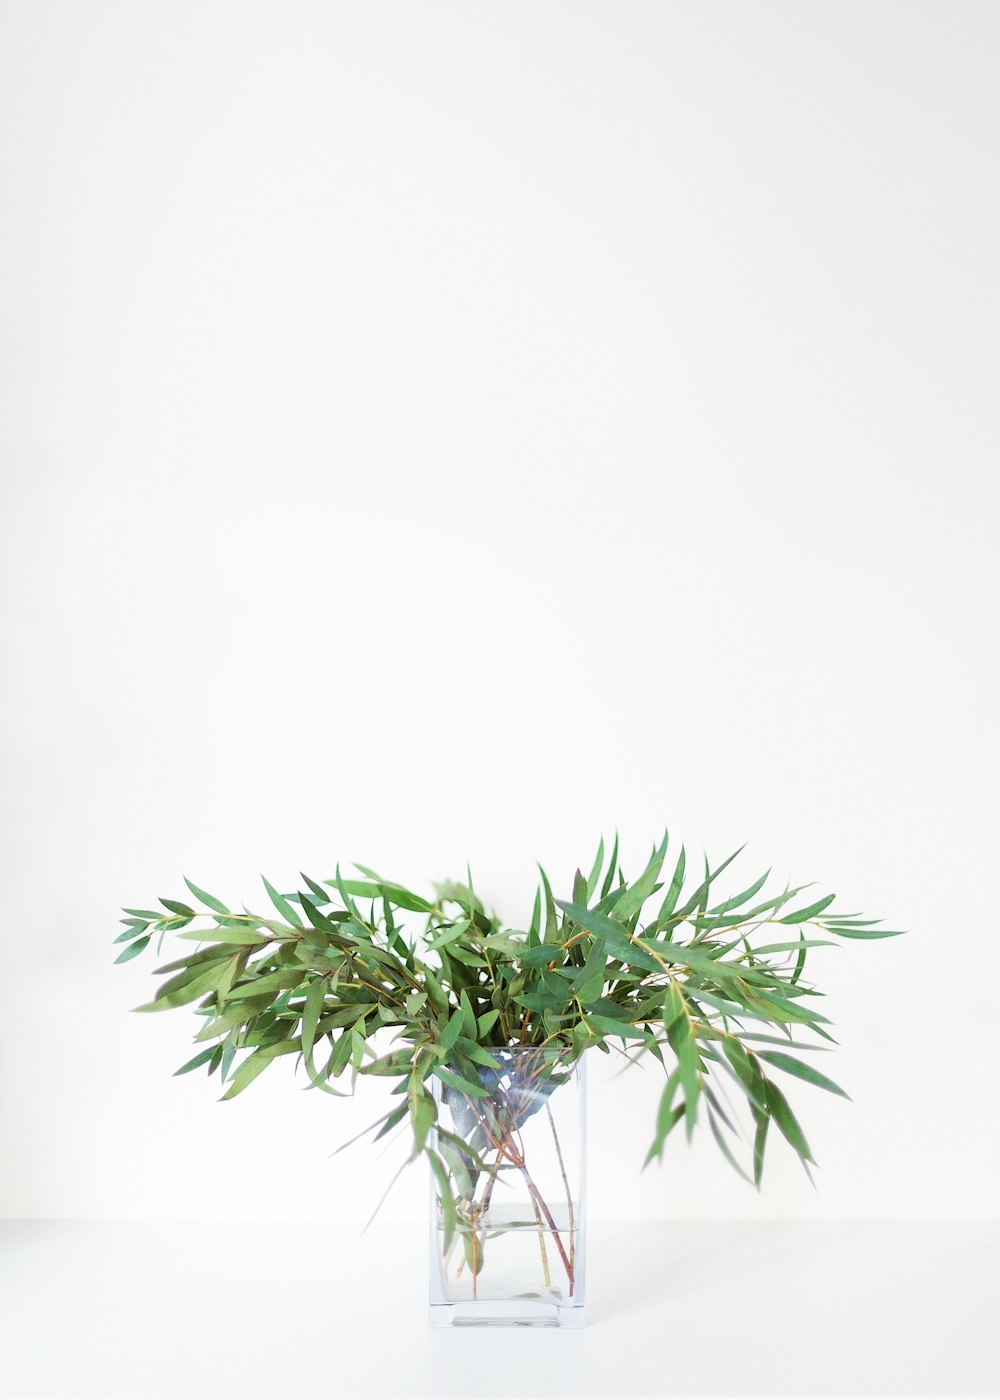 green plant on white background